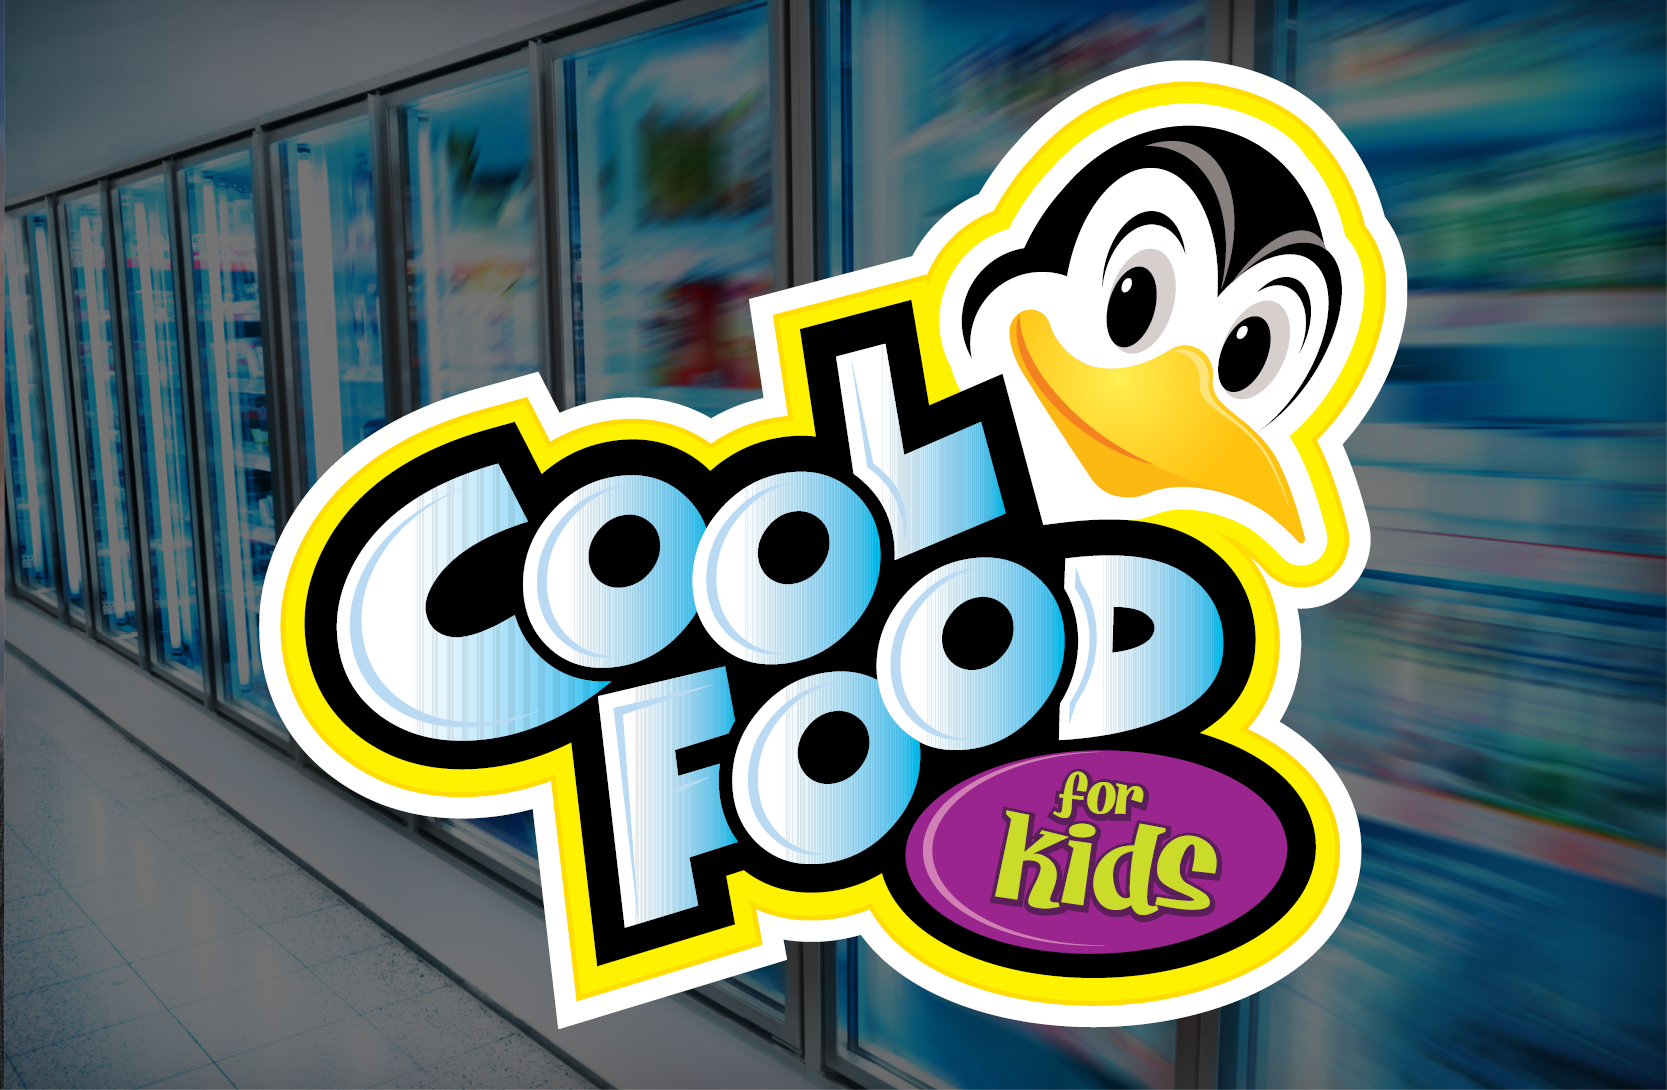 Cool Food for Kids